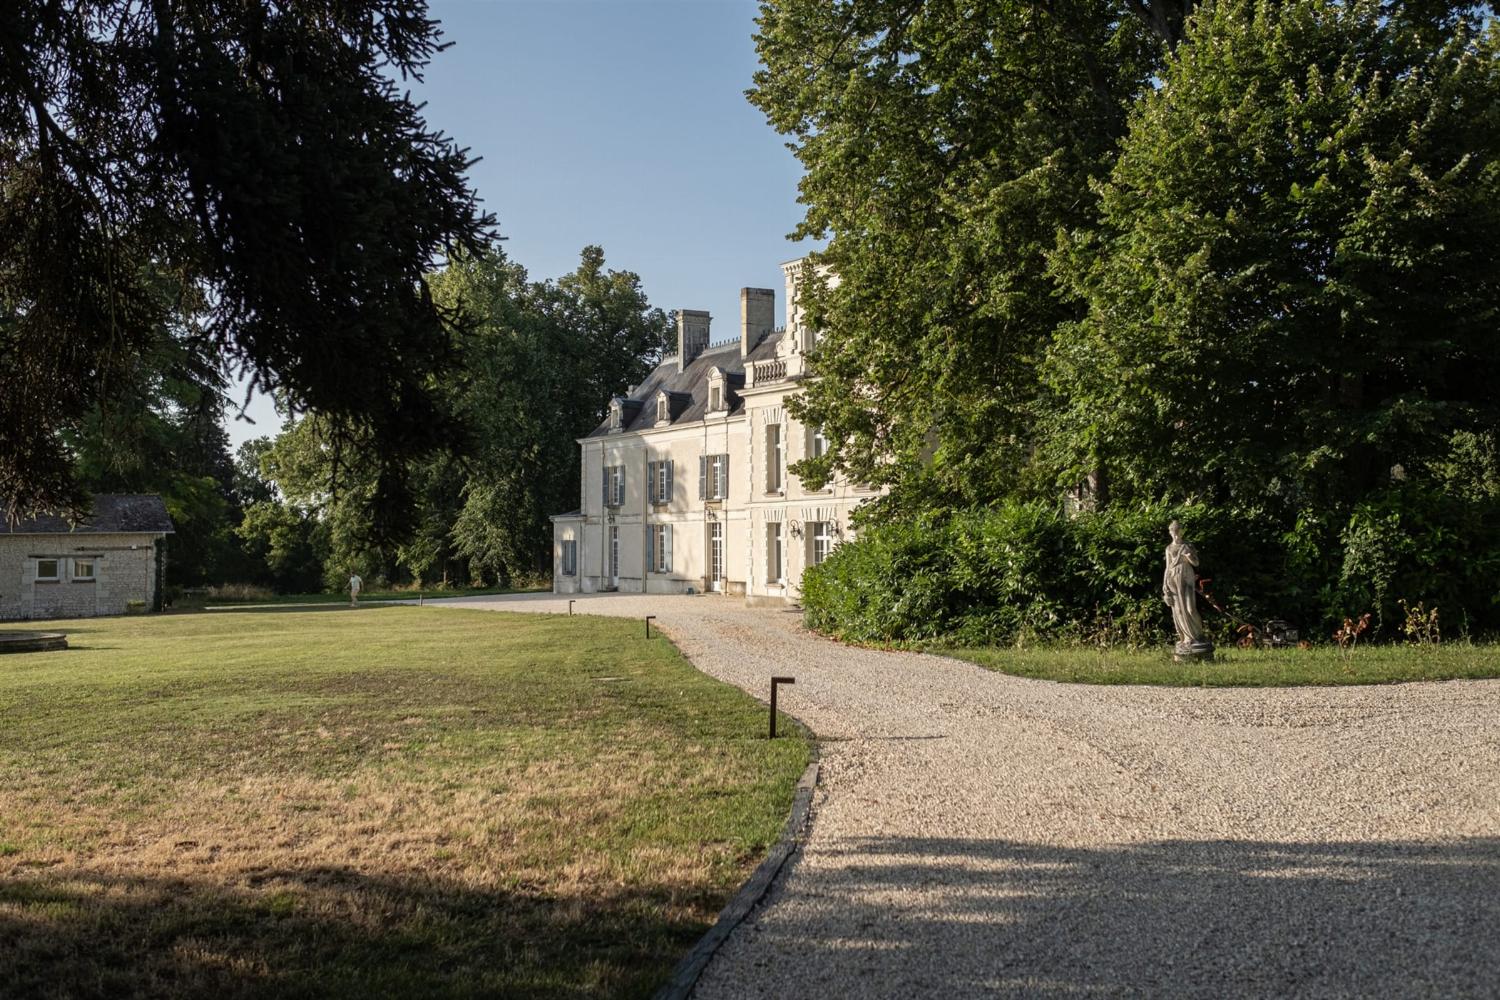 Holiday château in Indre-et-Loire